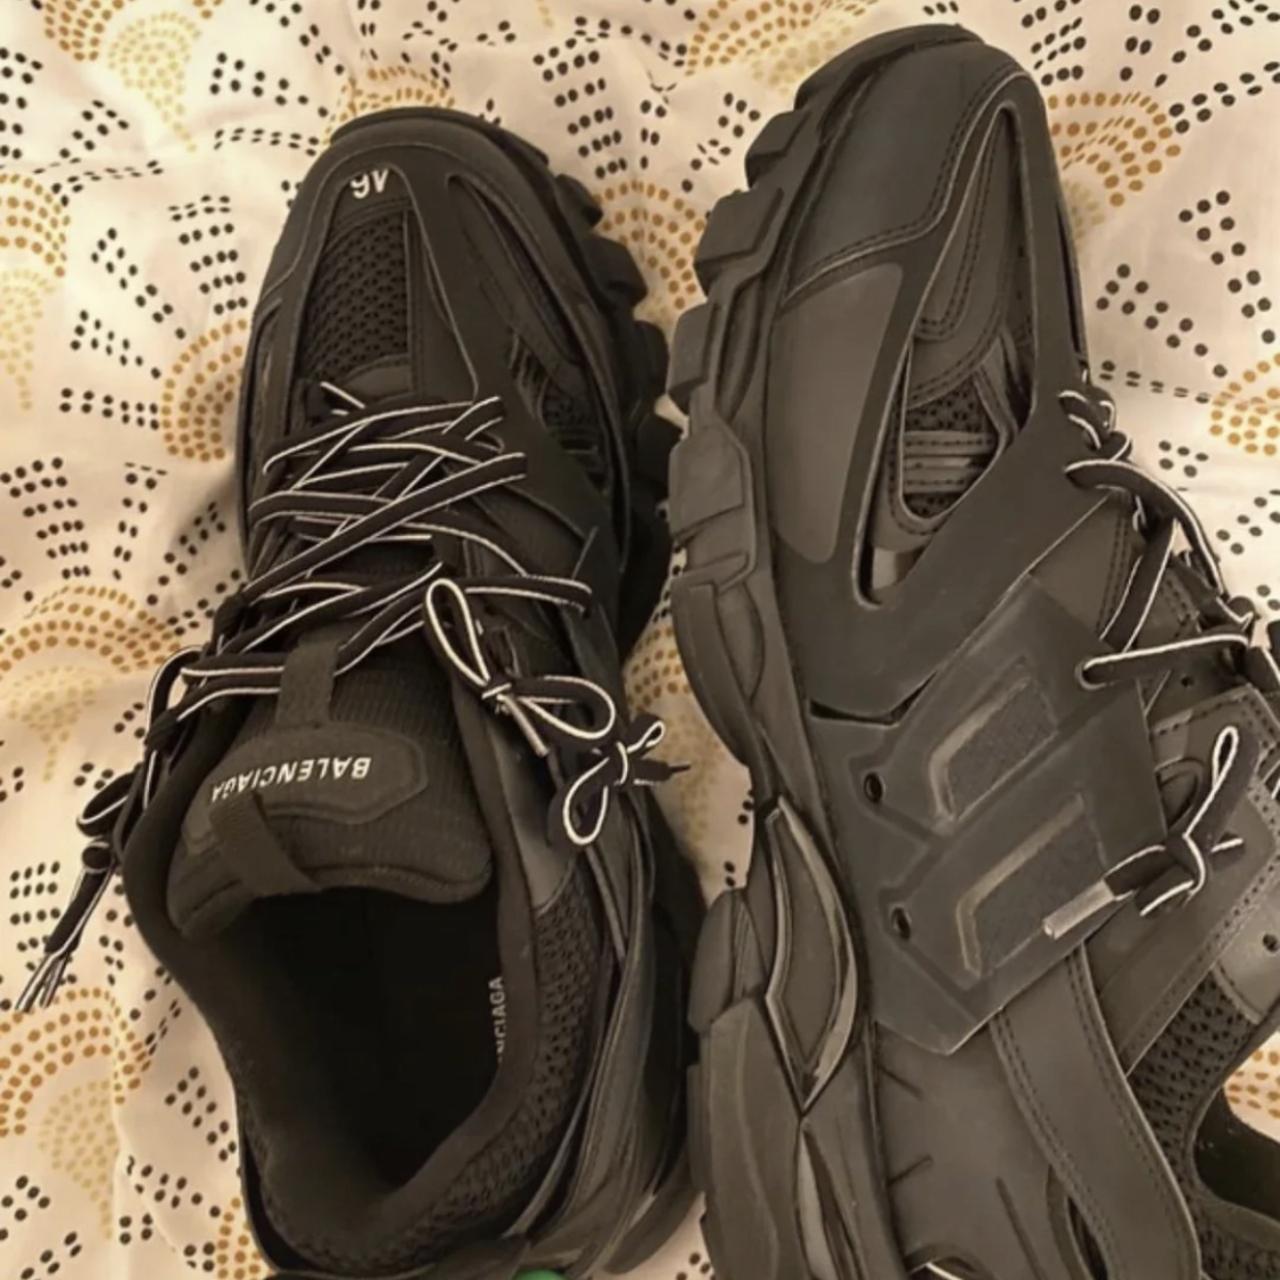 Balenciaga Tracks Trainers Size 10 Authentic Will be... - Depop